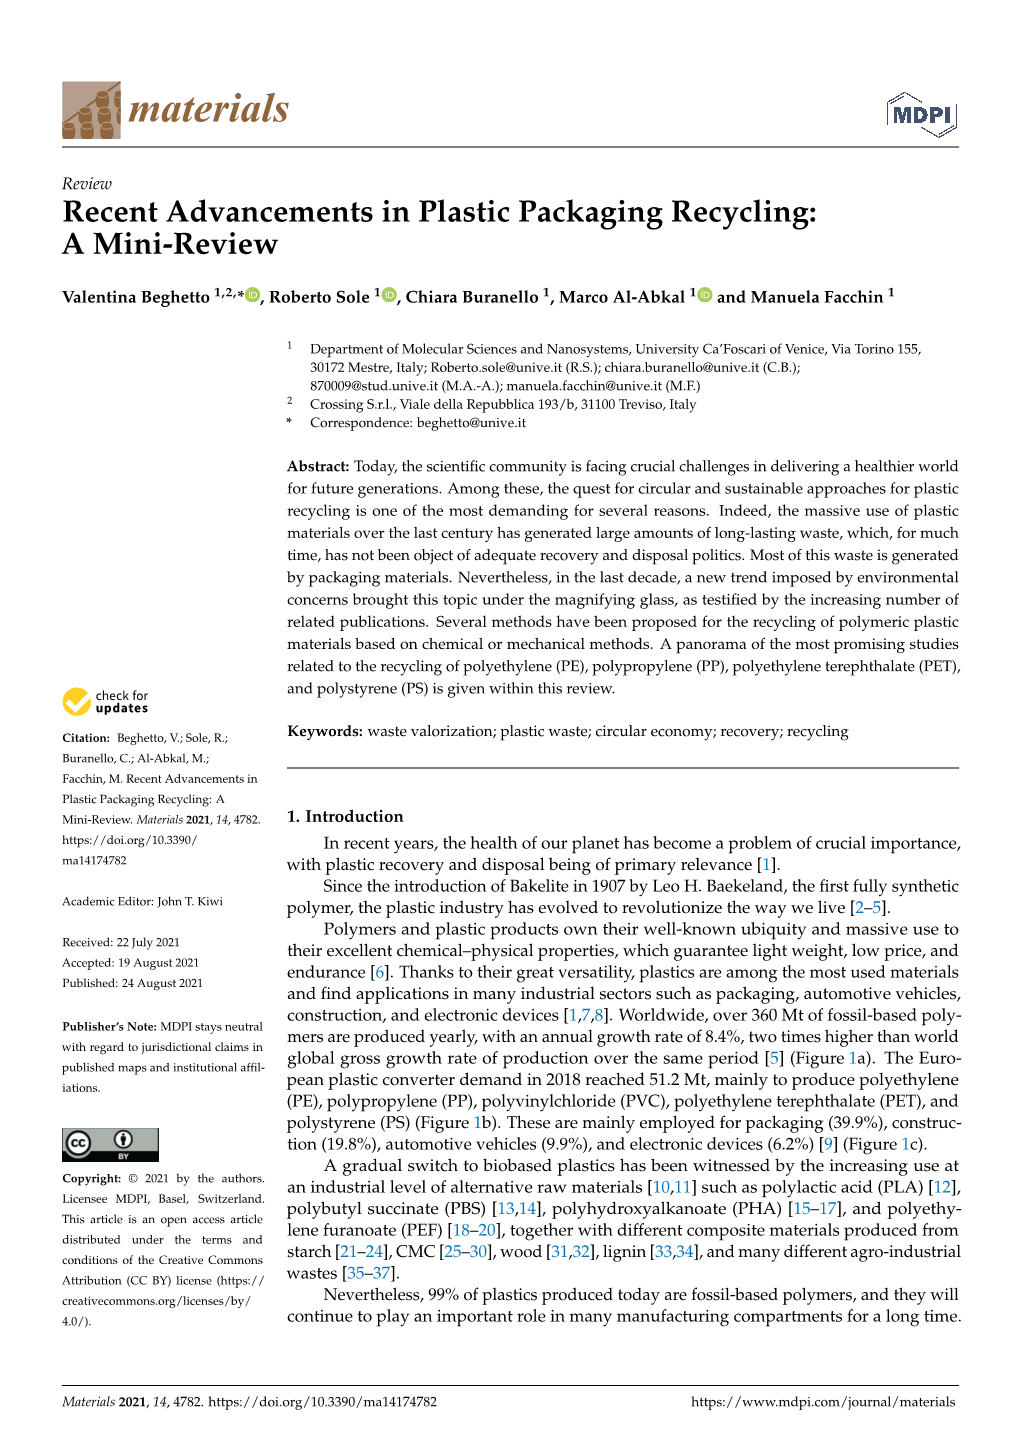 Recent Advancements in Plastic Packaging Recycling: a Mini-Review